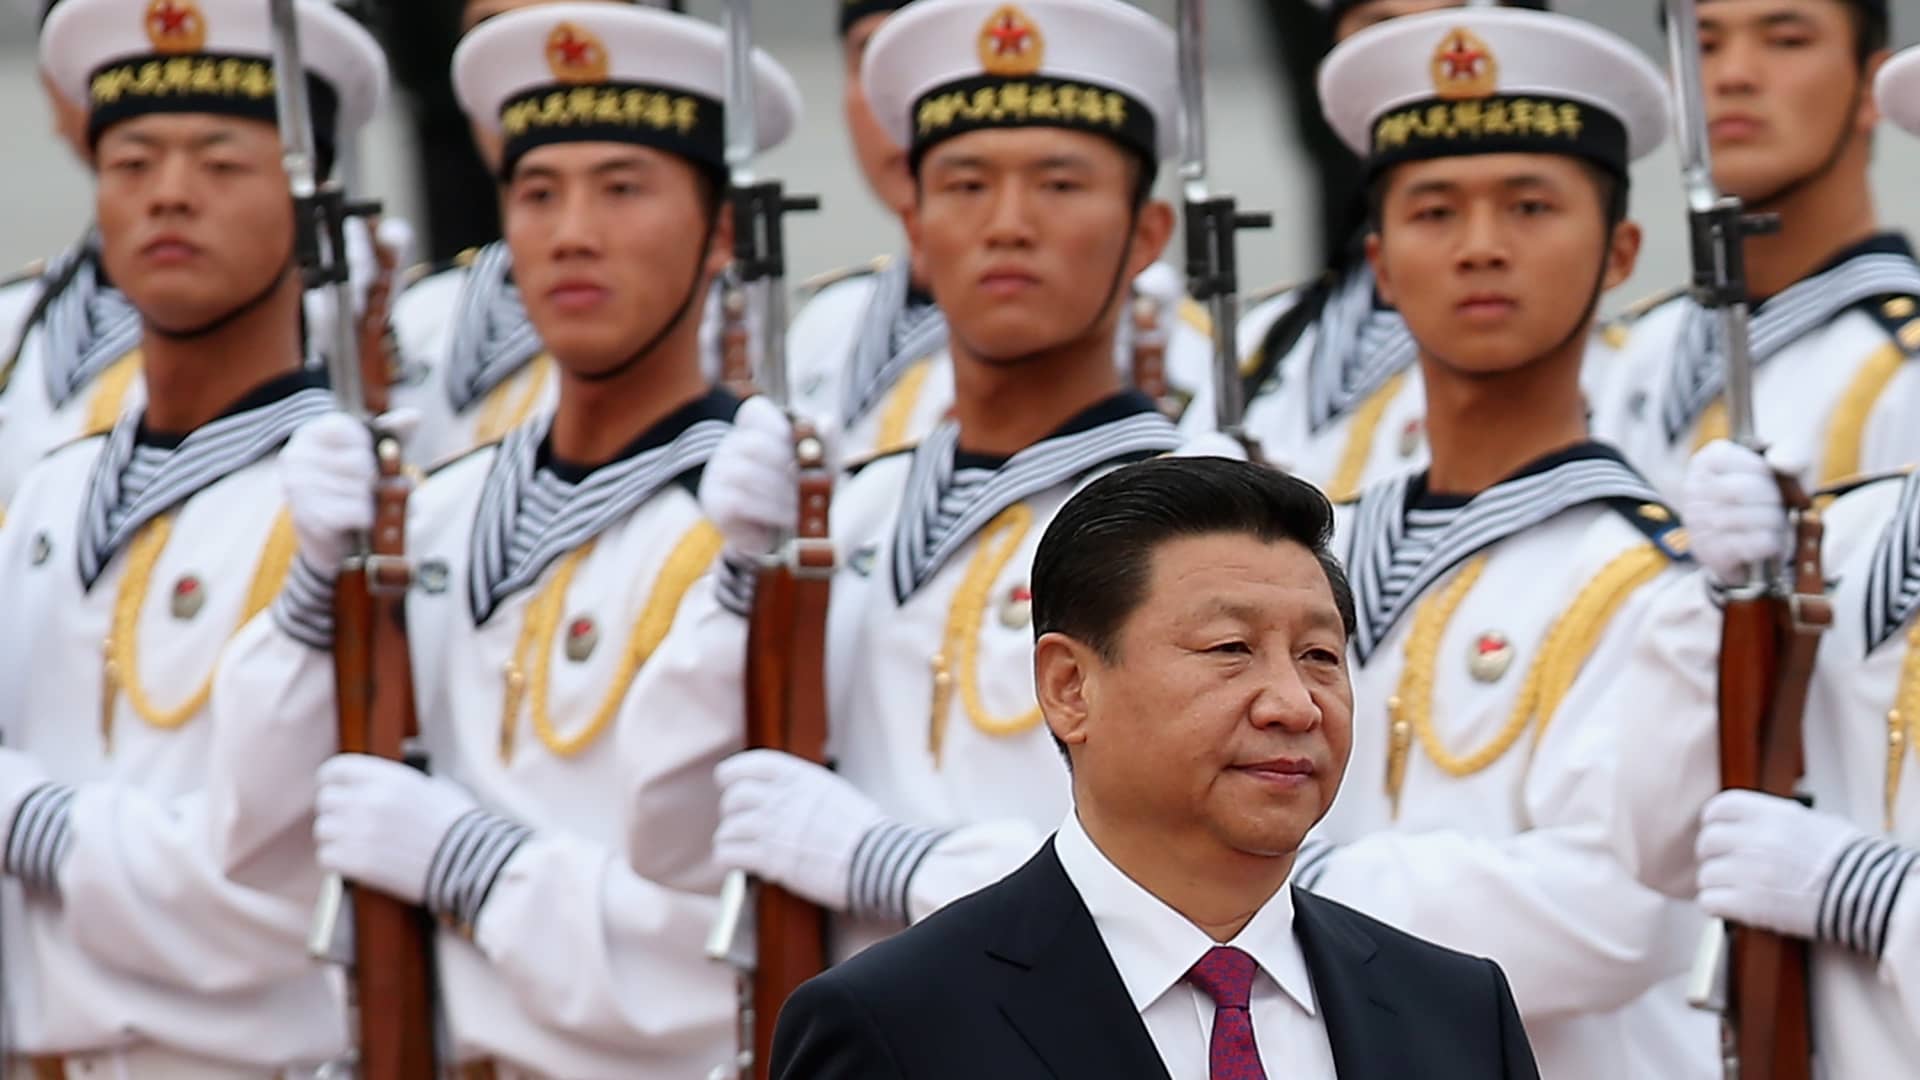 Chinese President Xi Jinping with a naval honor guard.